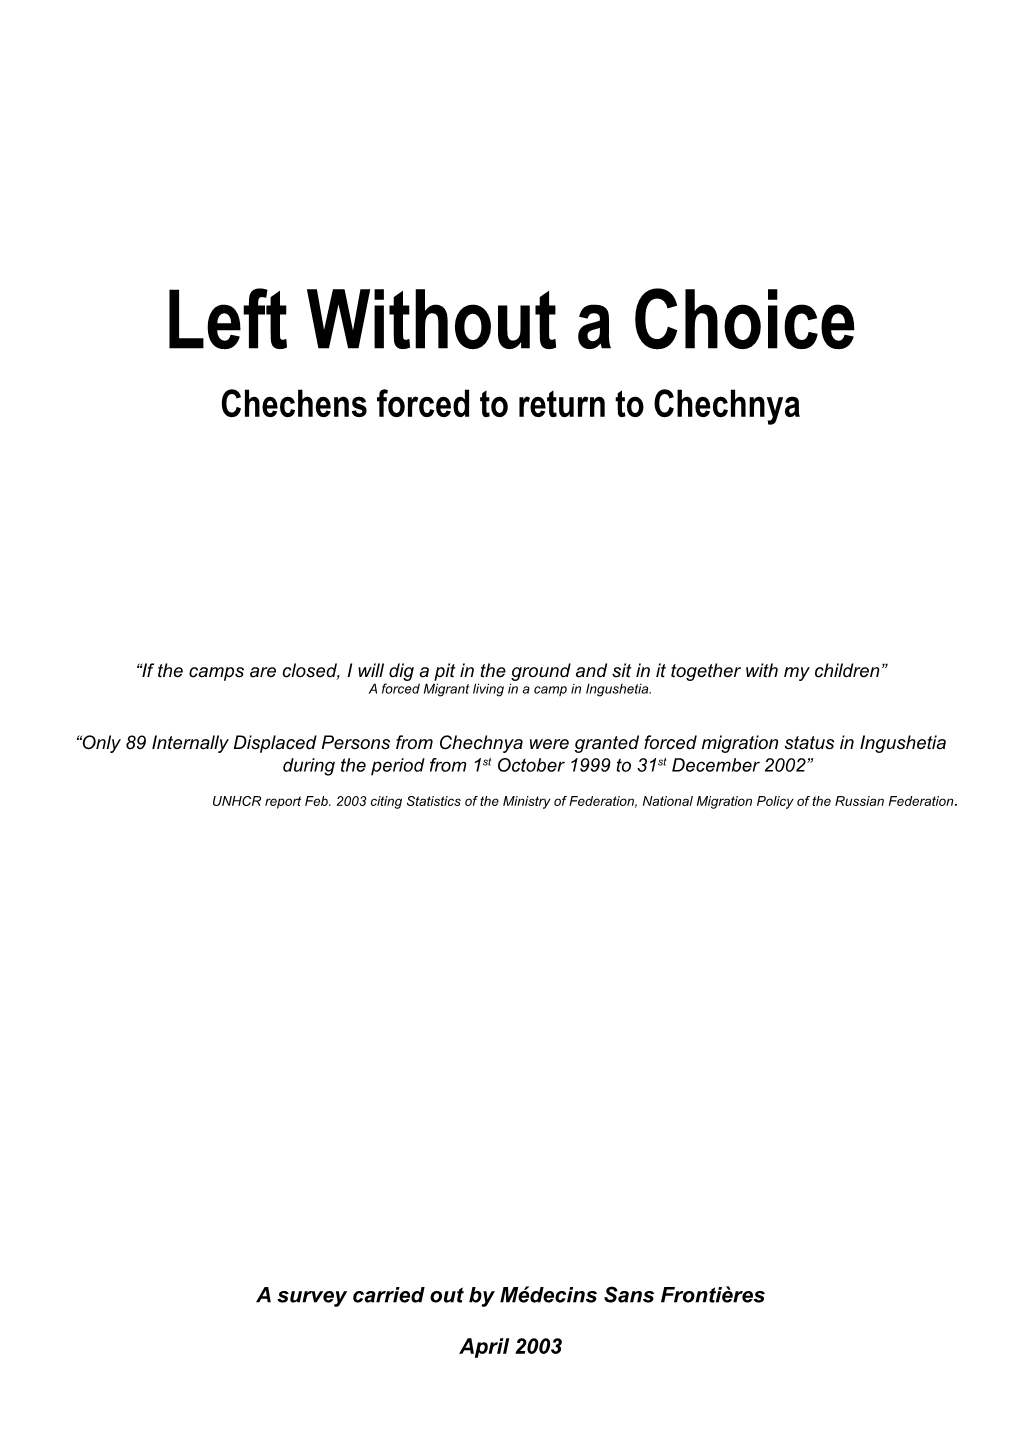 Left Without a Choice Chechens Forced to Return to Chechnya